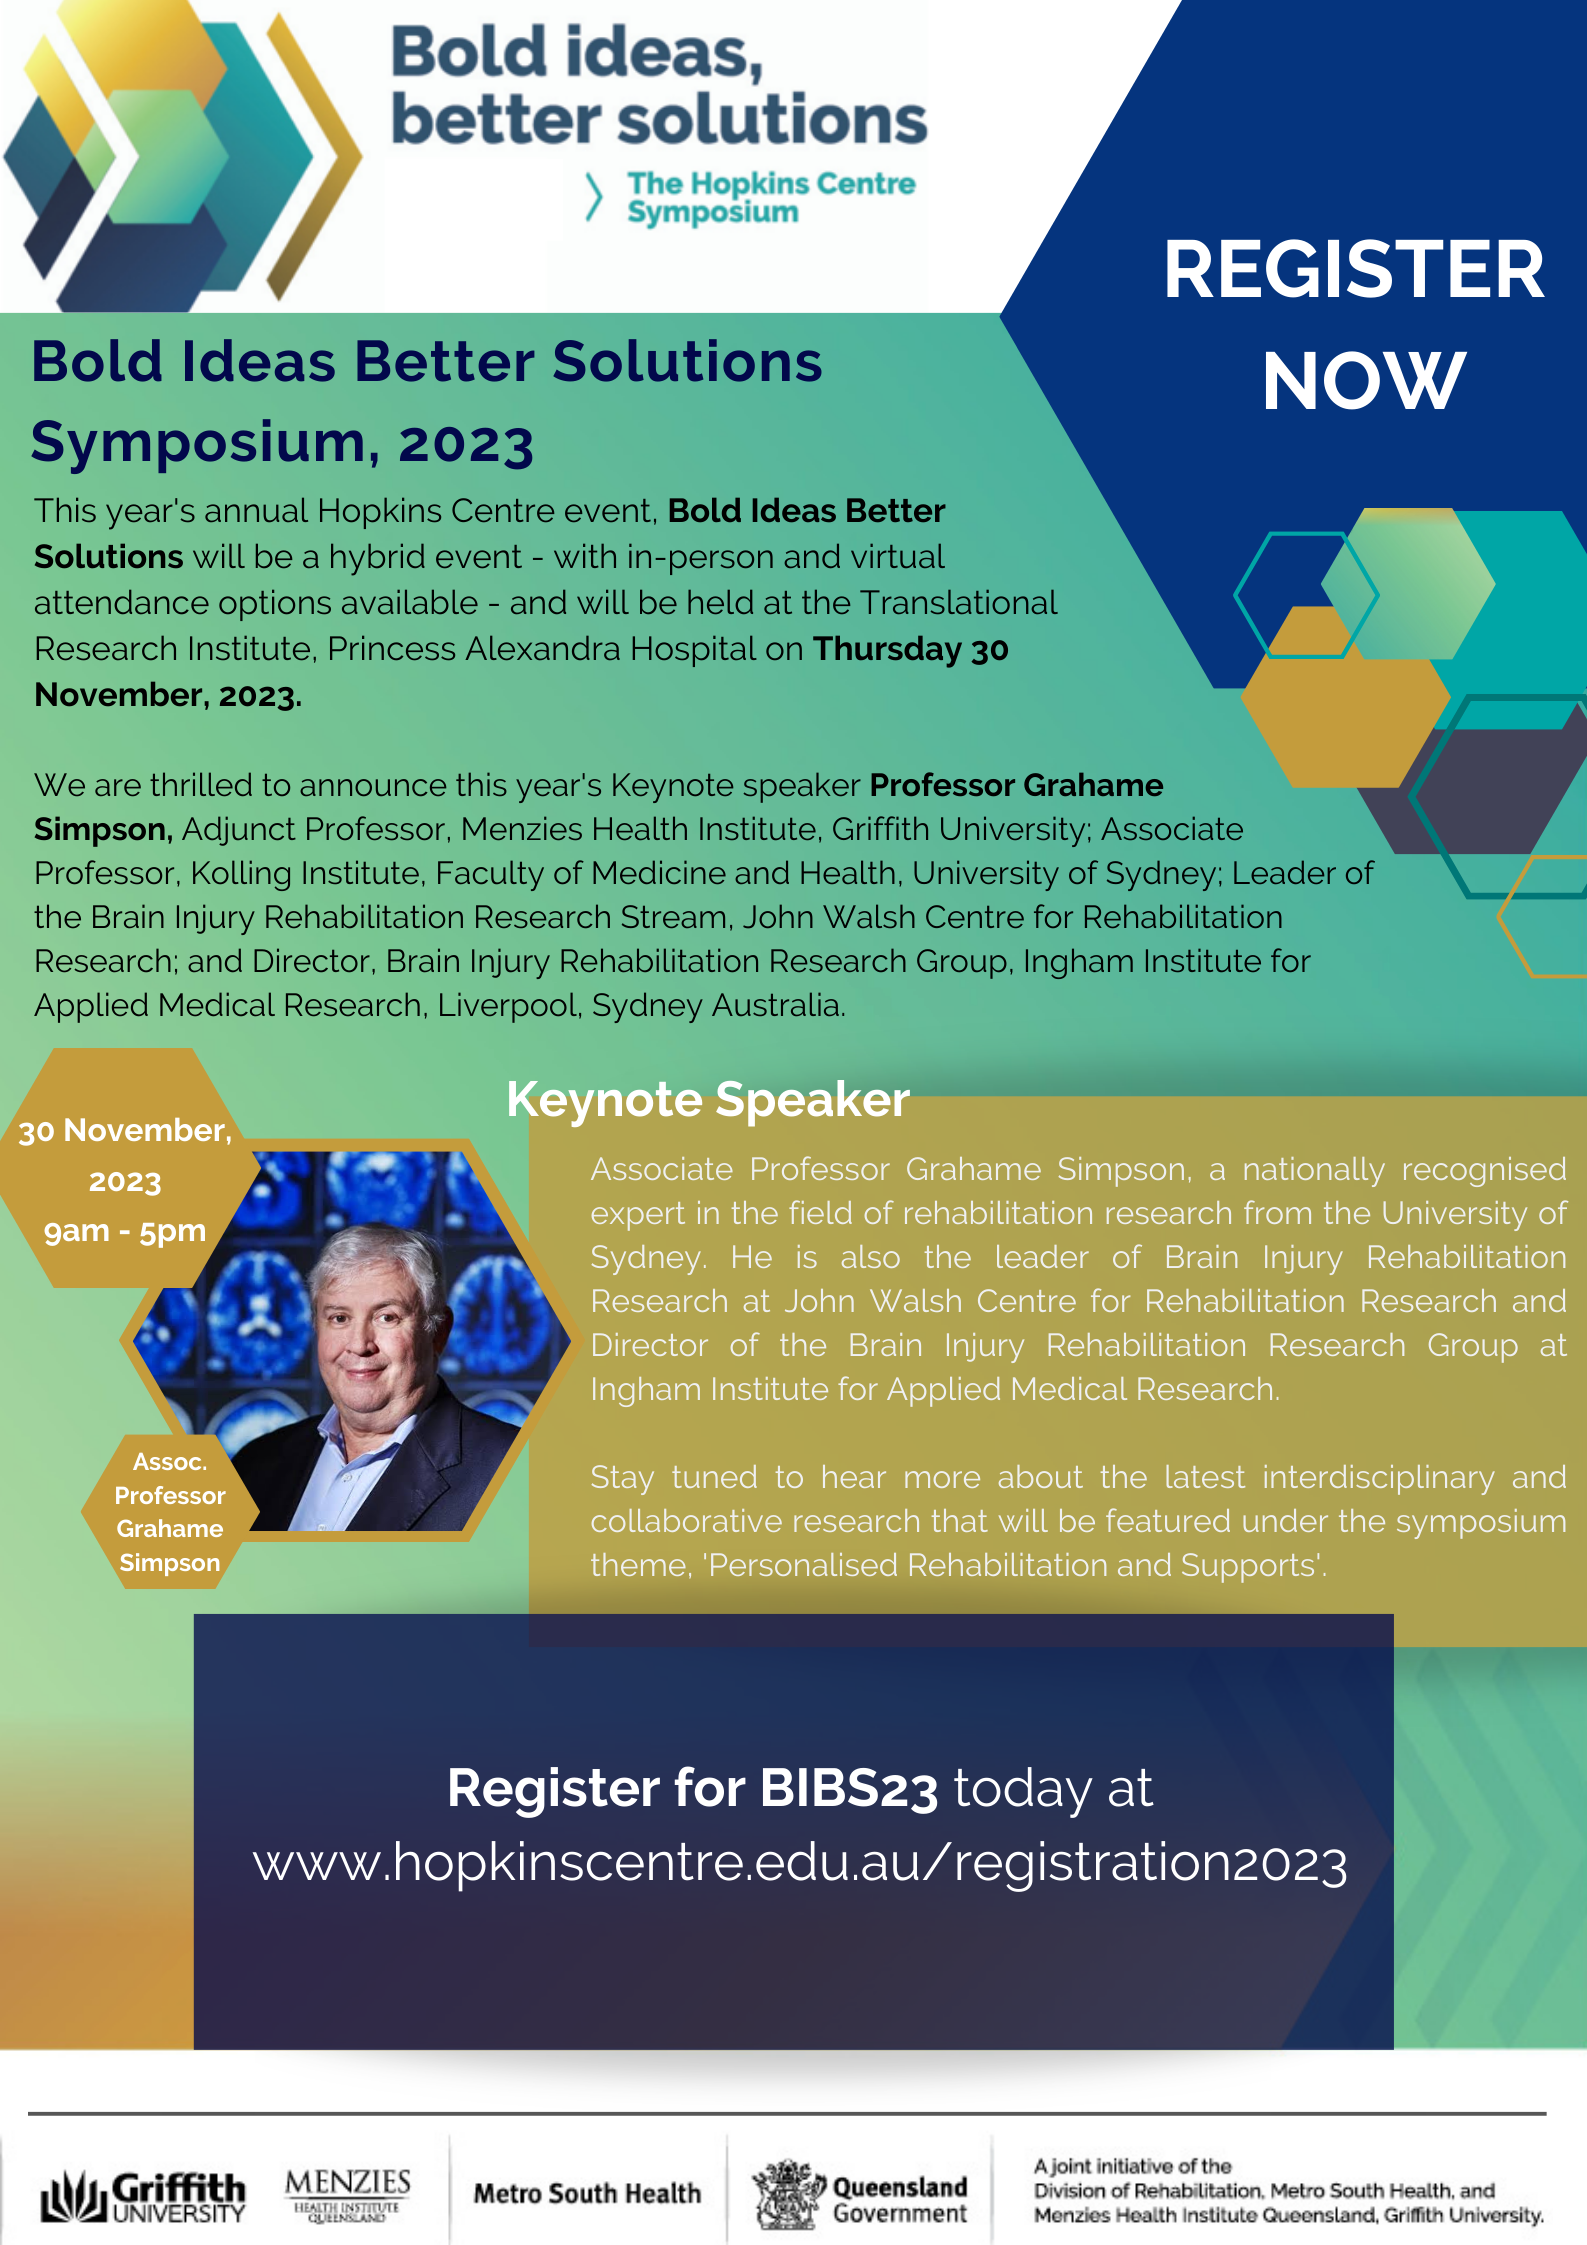 BIBS23 Registration Poster, in the Hopkins Centre colours and with an image of Associate Professor Grahame Simpson in a hexagonal shape in the lower section. The poster includes the following link to the registration page: https://www.hopkinscentre.edu.au/registration2023" 